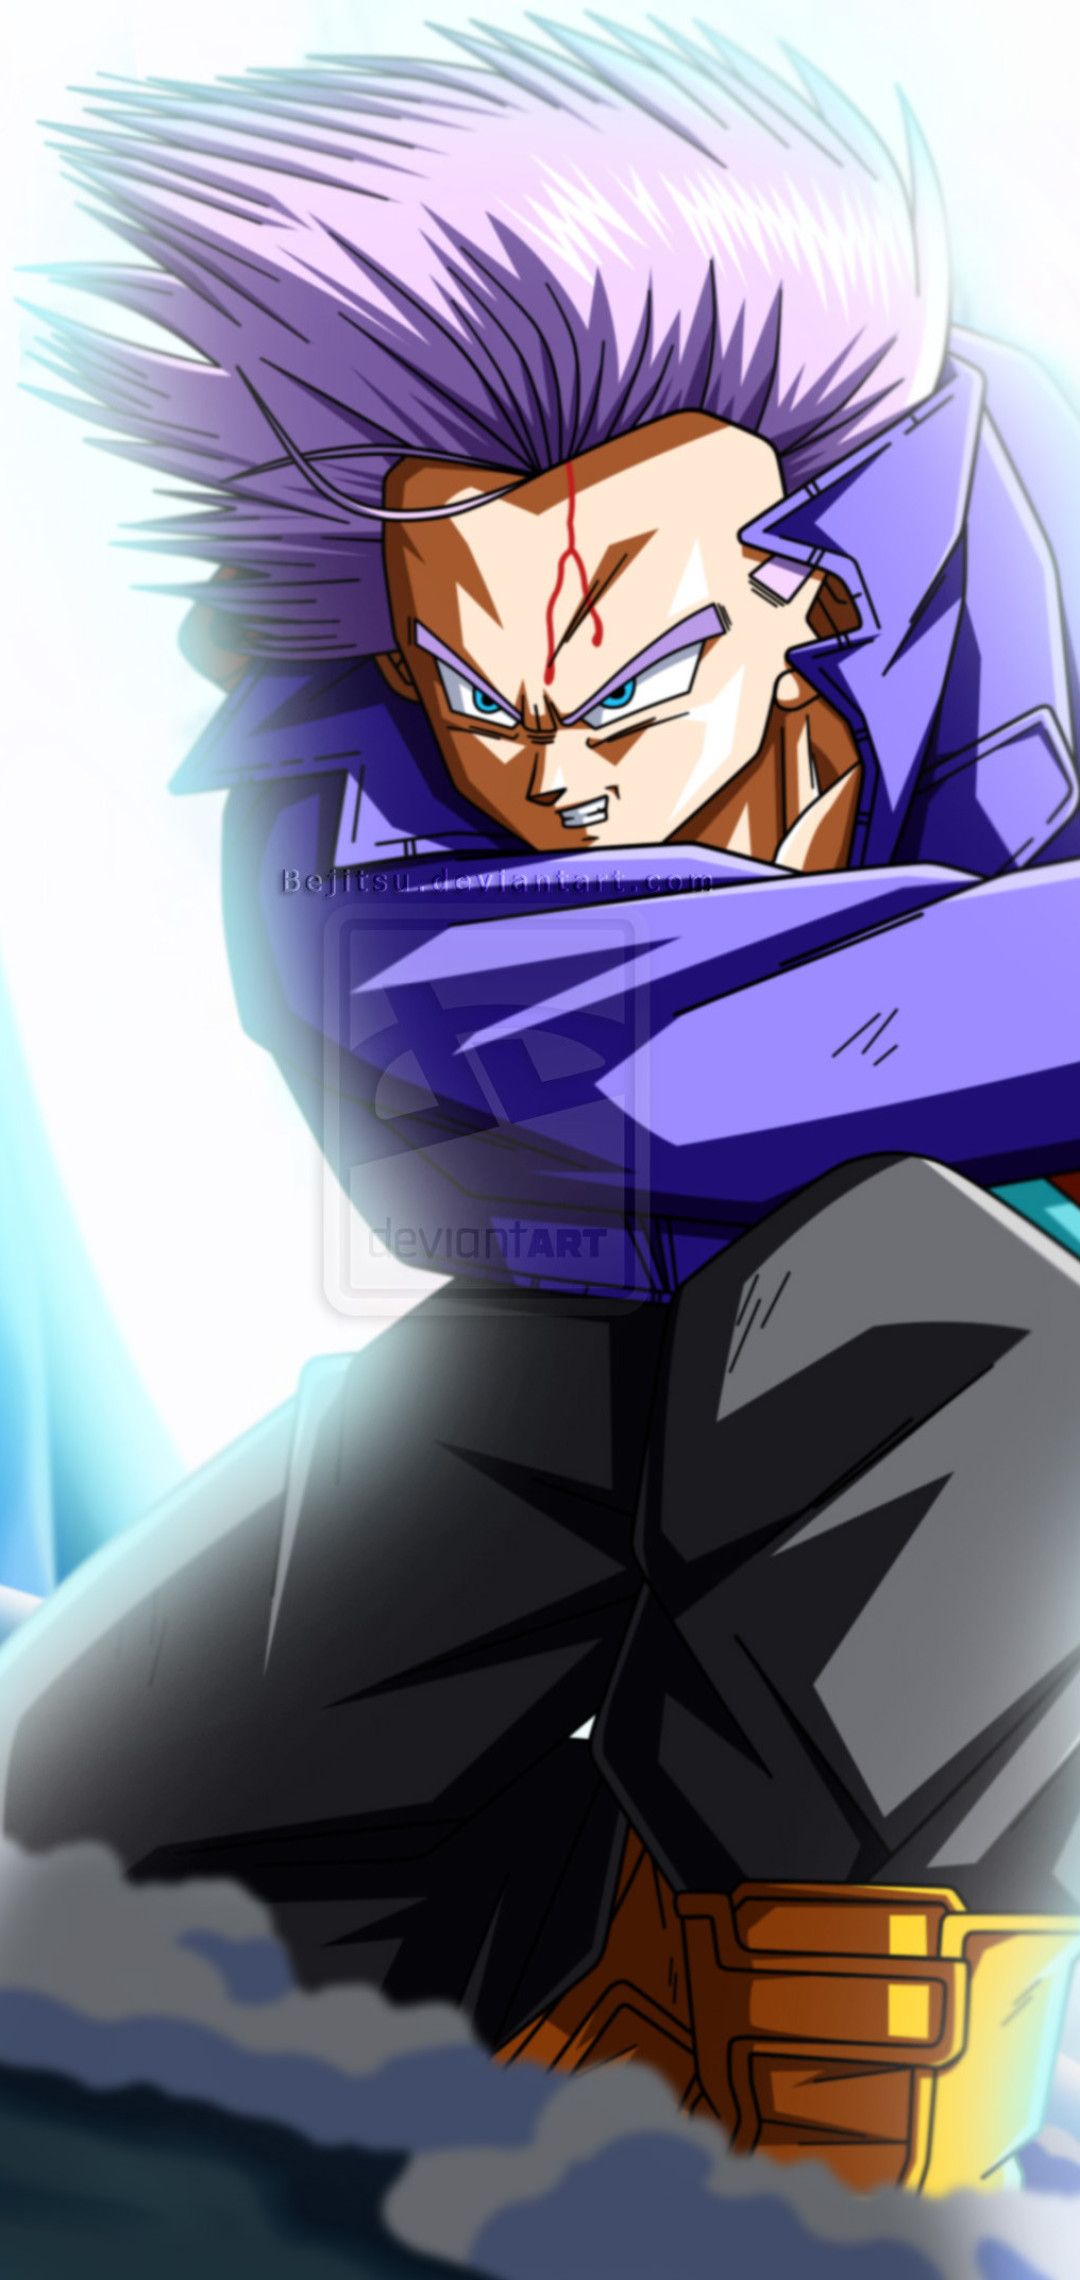 Trunks Dragon Ball Z 4k Wallpaper and Background Image